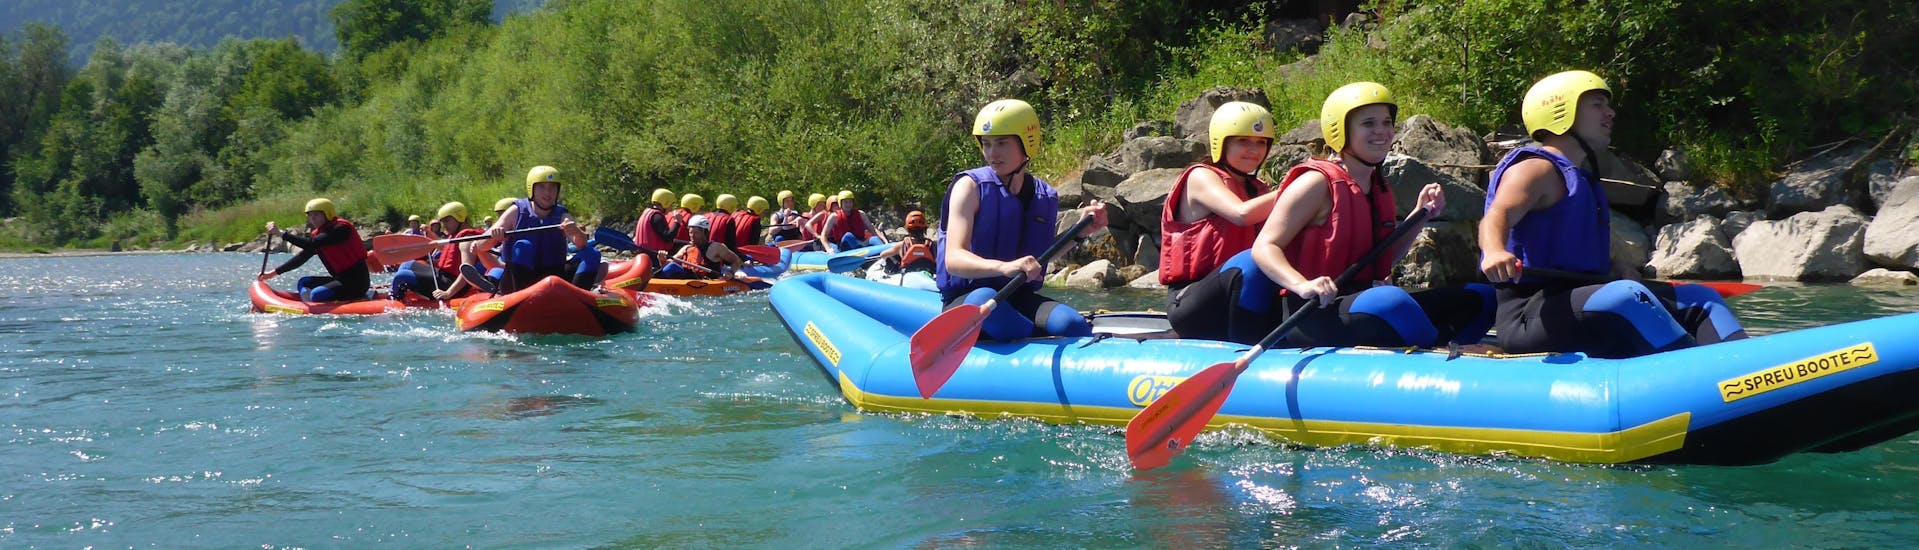 Canadier-Rafting on the Iller River in Allgäu.